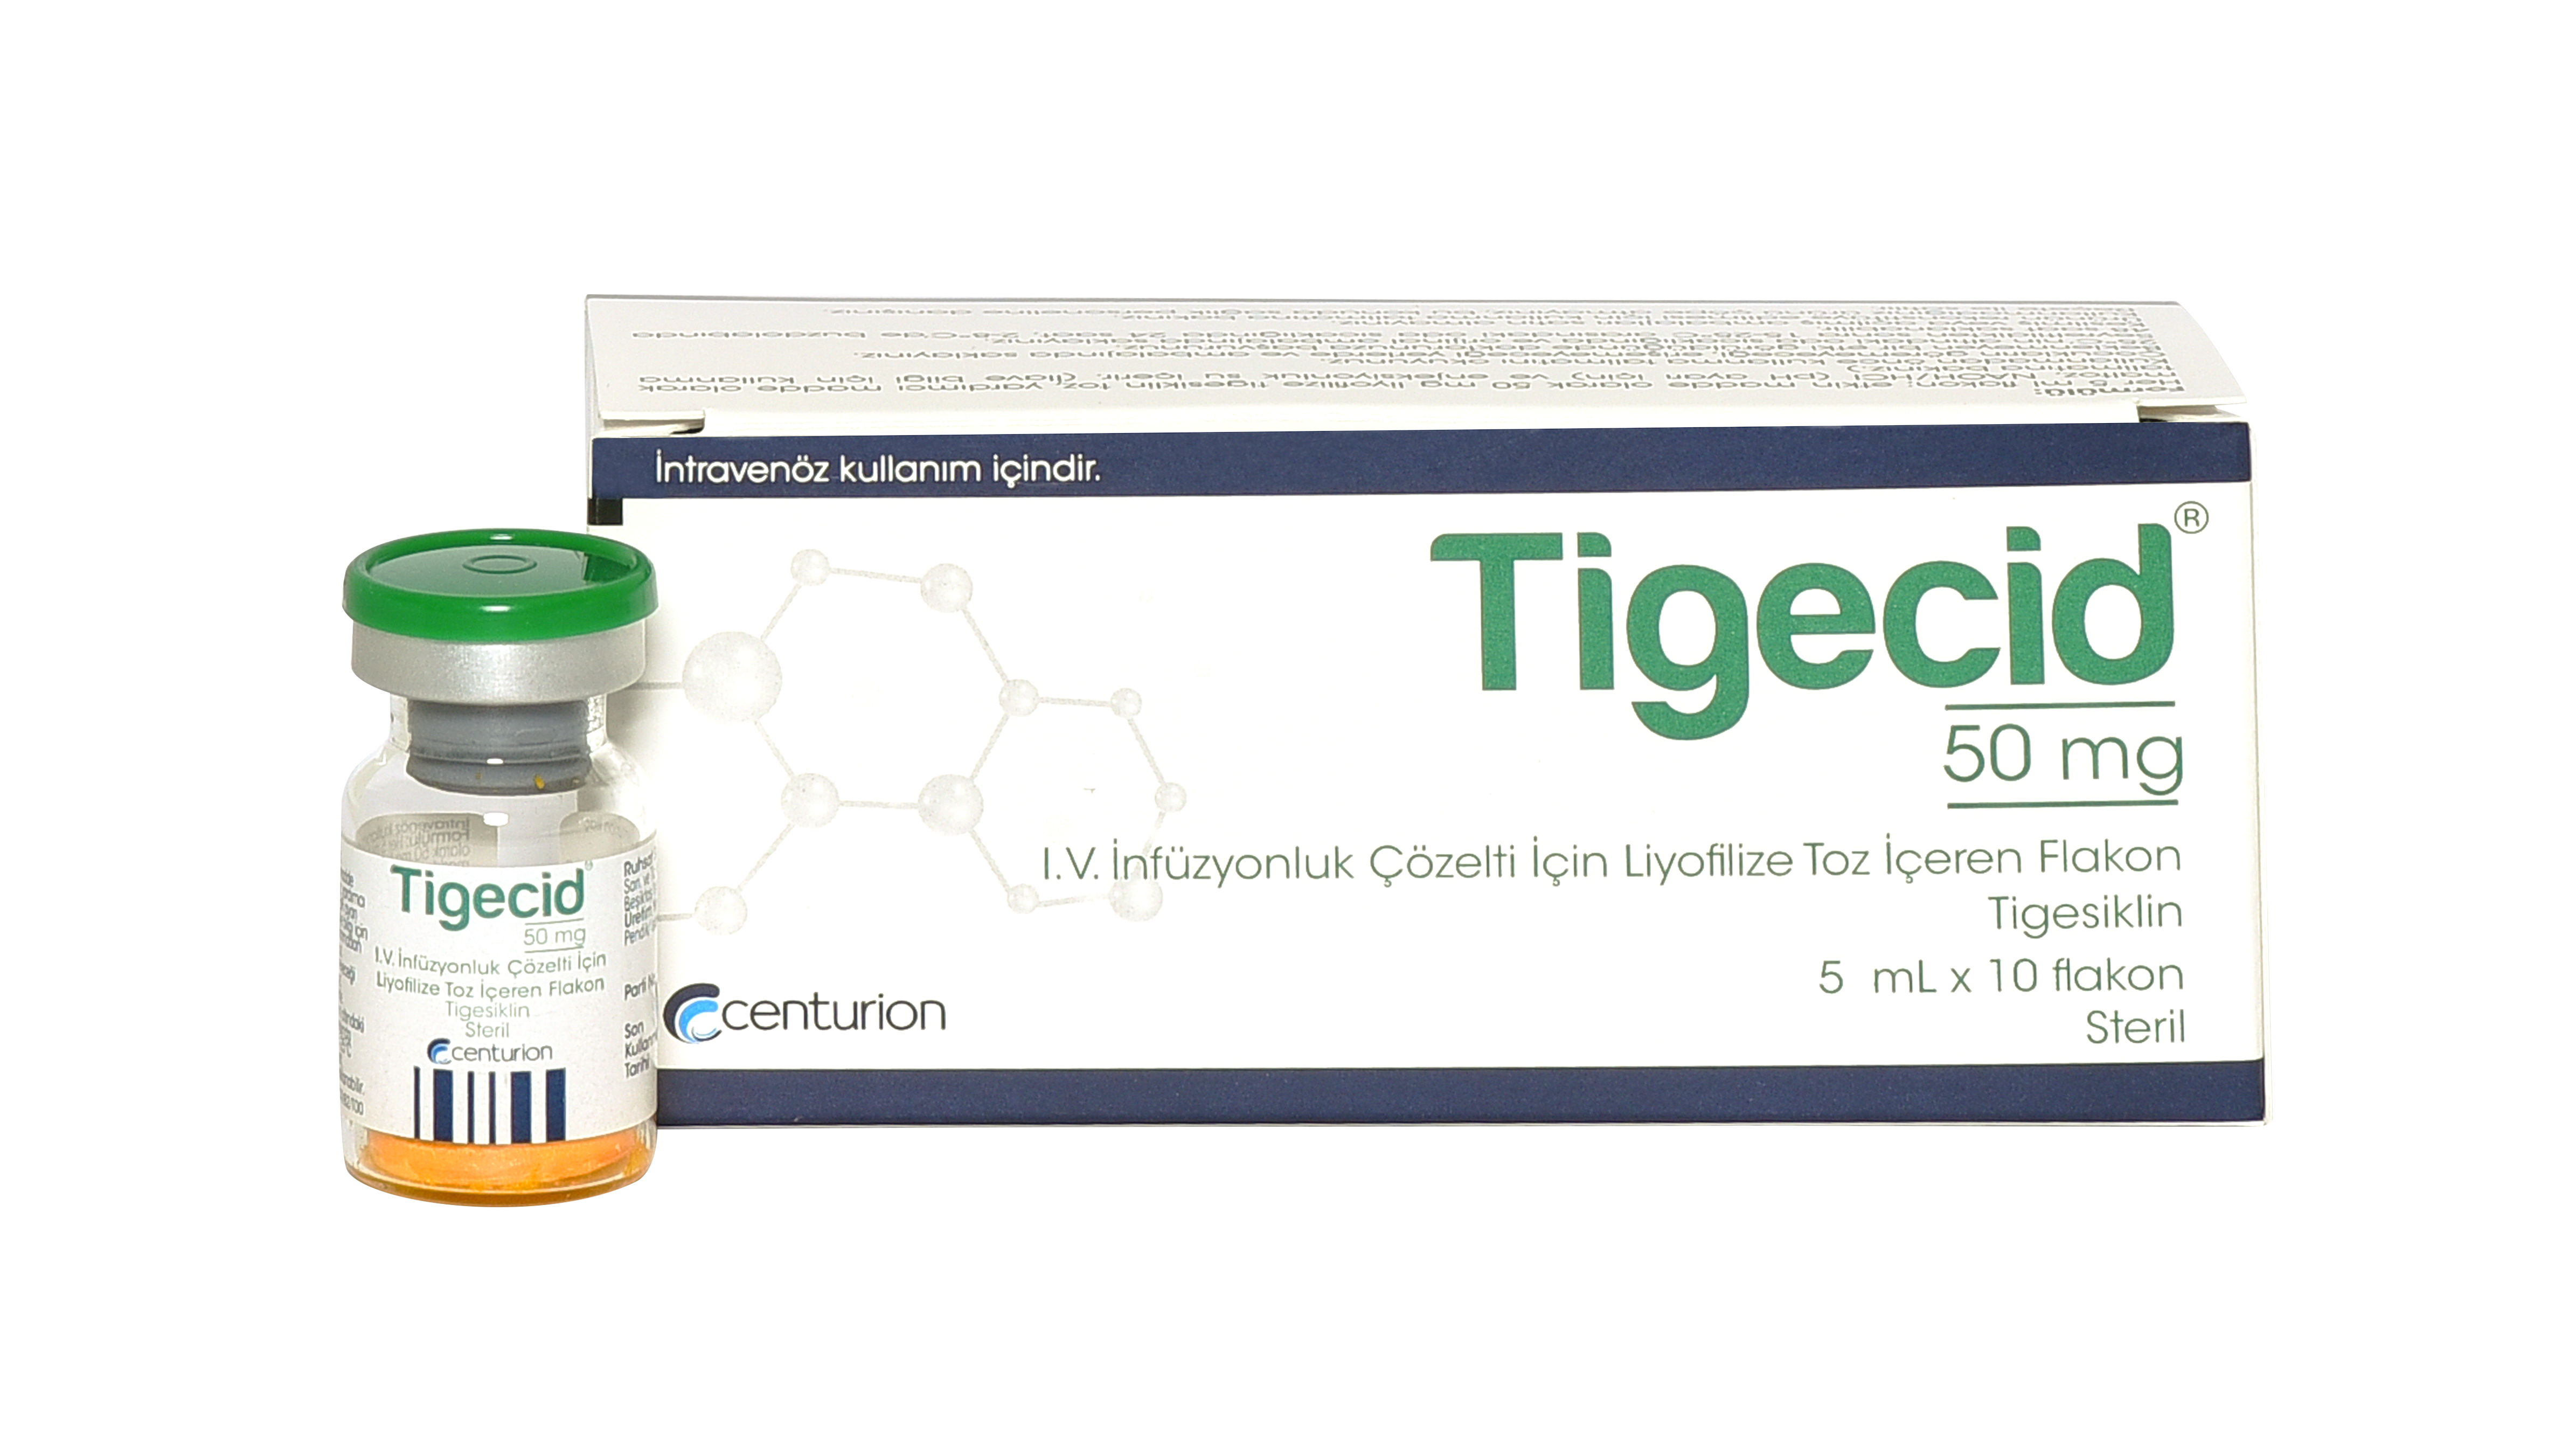 Tigecycline 50mg powder for solution for infusion